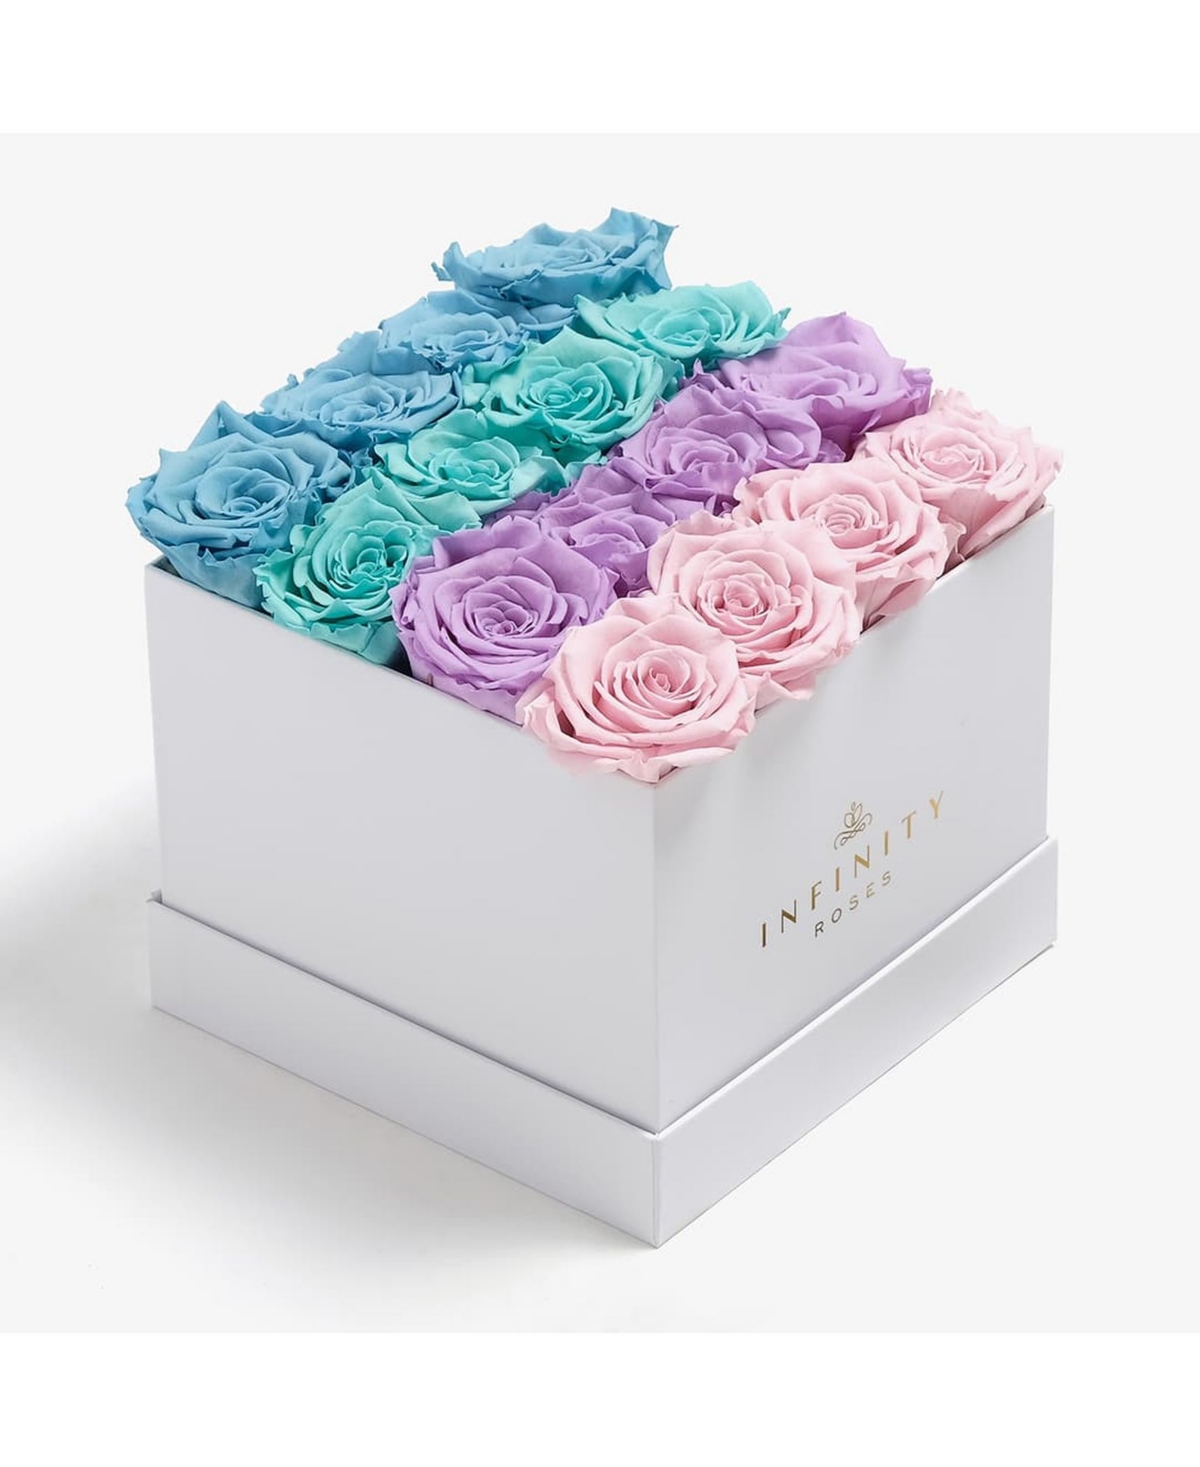 Square Box of 16 Blue Ombre Real Roses Preserved To Last Over A Year - Multi